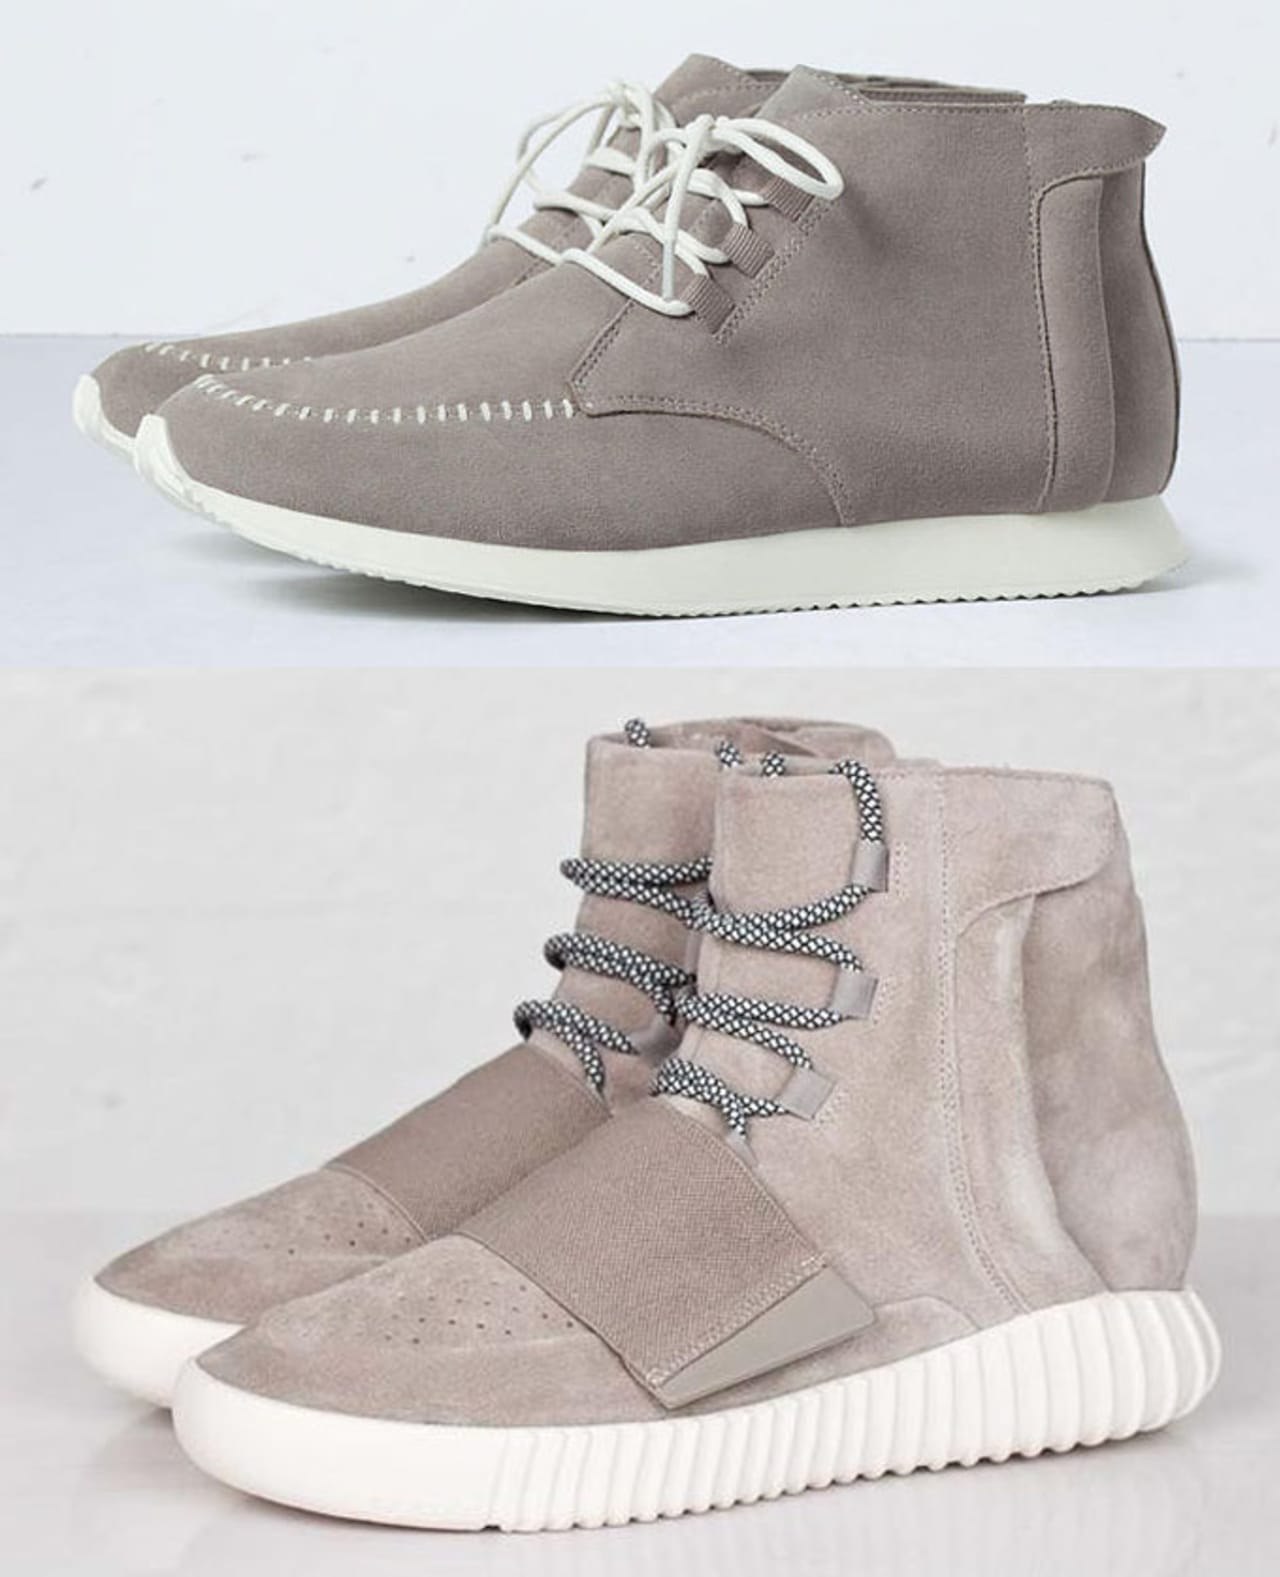 The Top 10 Most Expensive Yeezy Shoes Ever Sold | atelier-yuwa.ciao.jp